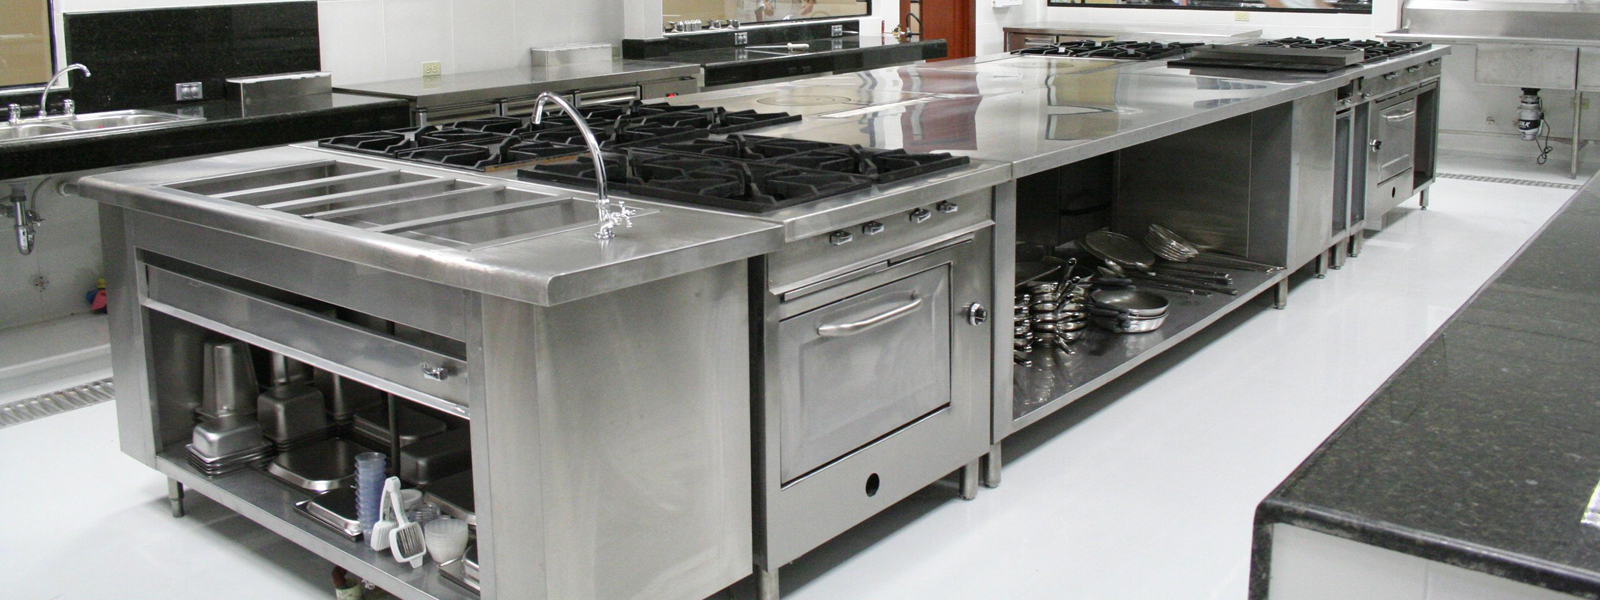 Budget Food Equipment Vancouver Surrey Lower Mainland Restaurant And Kitchen Food Equipment For Sale